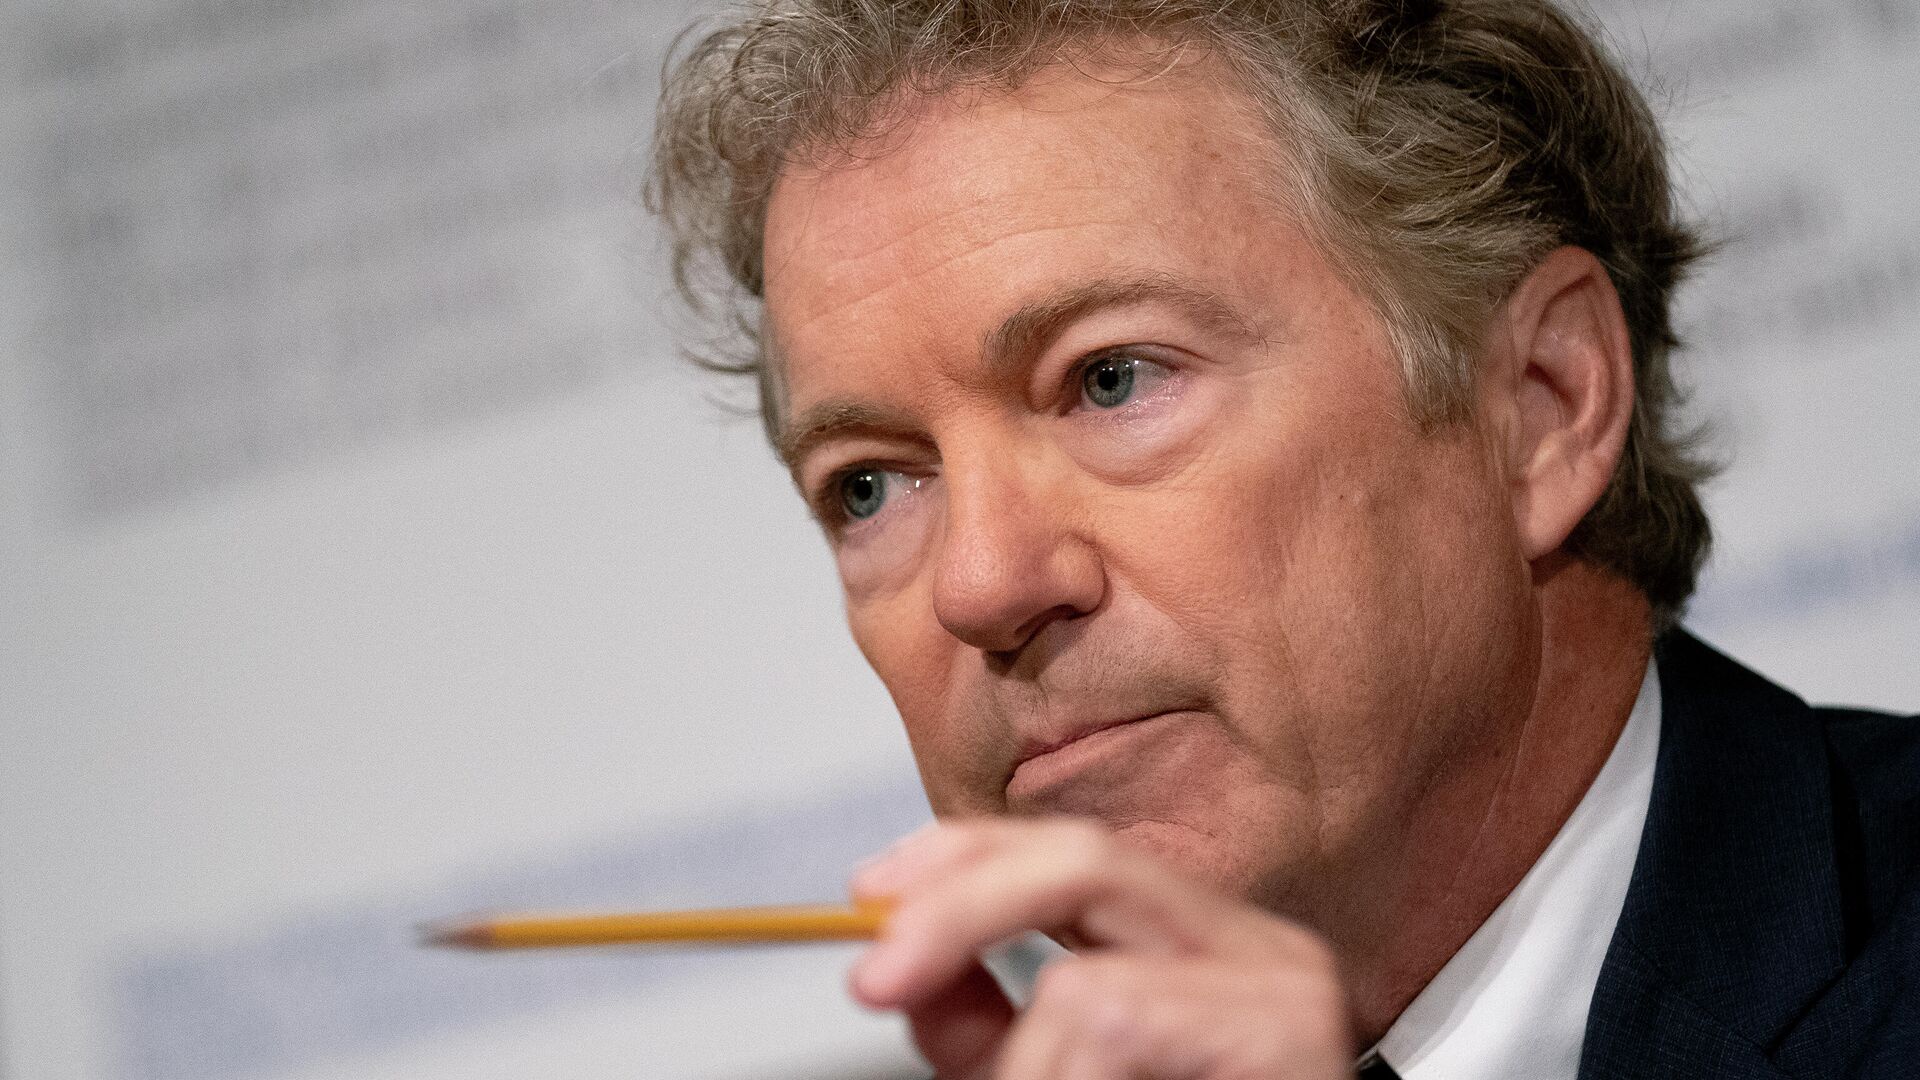 Senator Rand Paul (R-KY) speaks during the Senate Health, Education, Labor, and Pensions Committee hearing on Capitol Hill in Washington, DC, on July 20, 2021 - Sputnik International, 1920, 18.01.2022